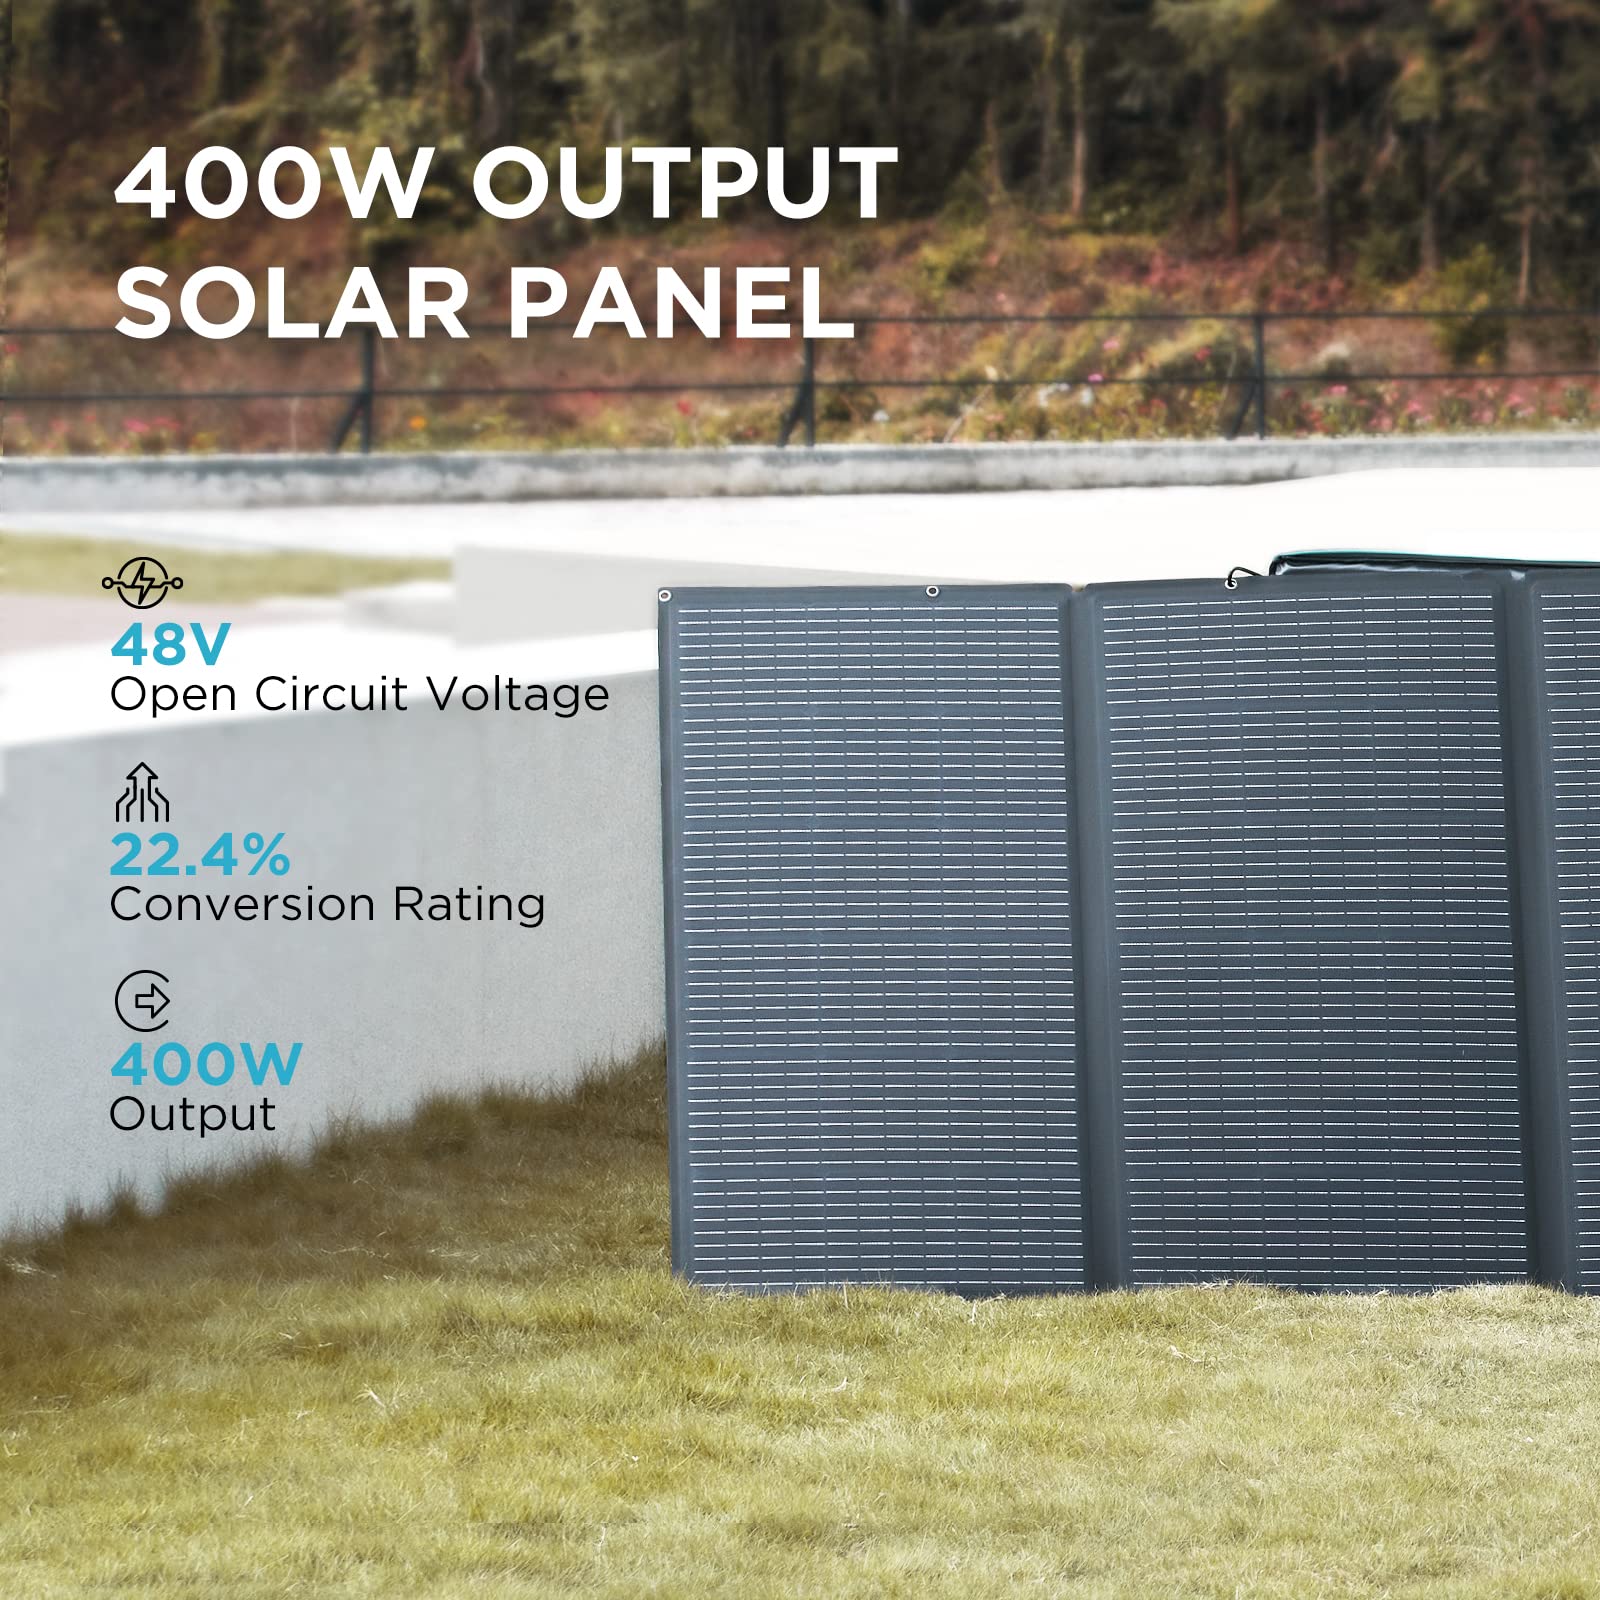 EF ECOFLOW Solar Generator 256Wh RIVER 2 with 400W Solar Panel LiFePO4 Battery, Up to 600W AC Outlets, Portable Power Station for Outdoor Camping/RVs/Home Use